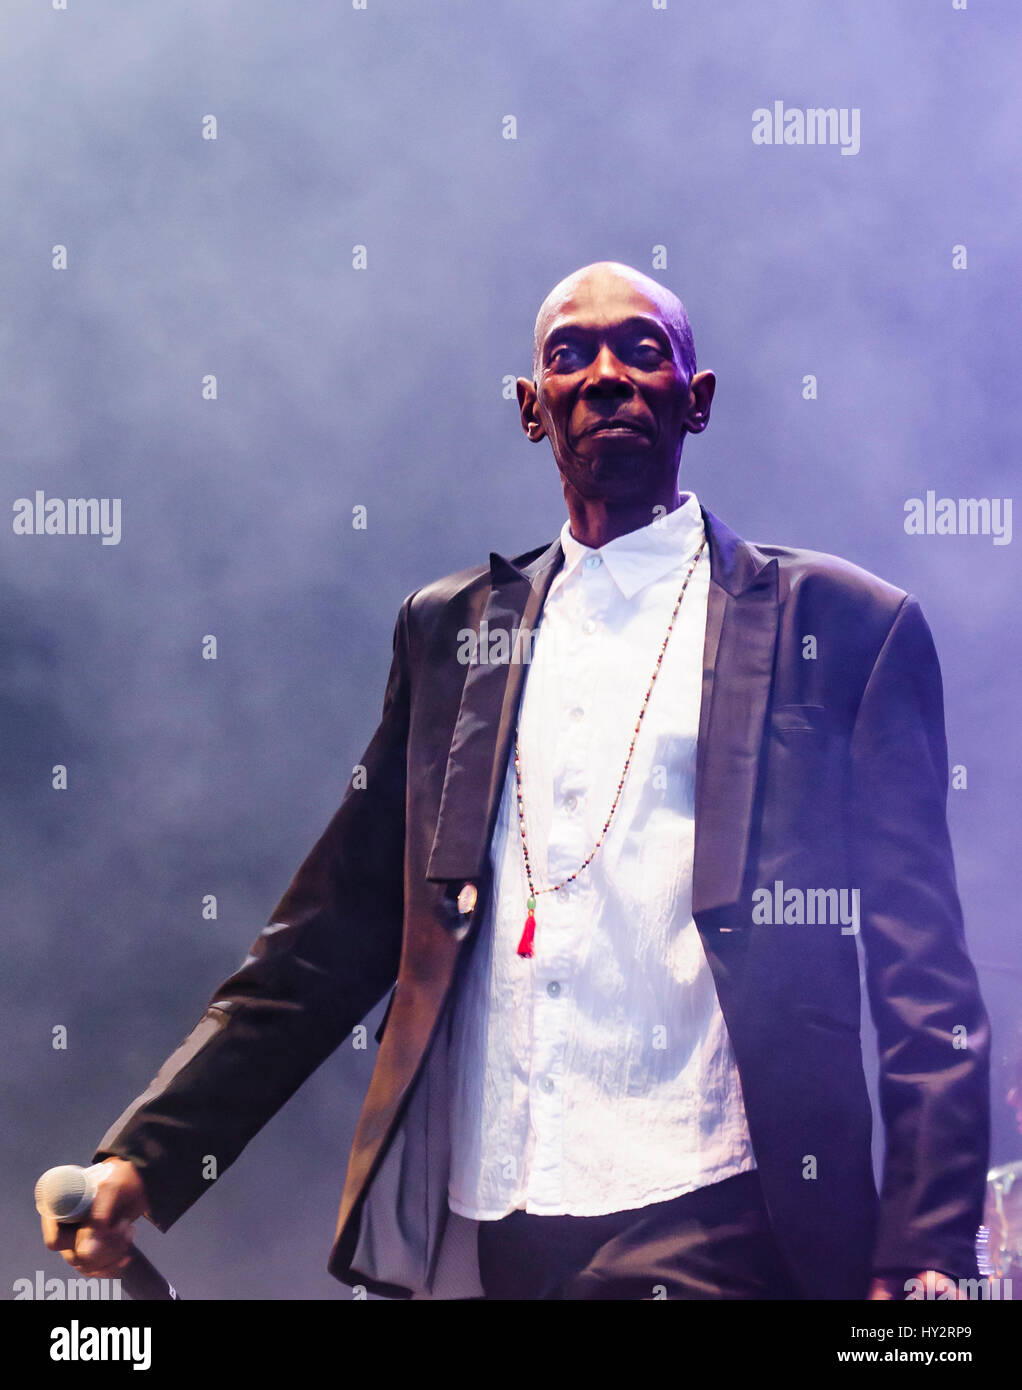 BELFAST, NORTHERN IRELAND. 11 JUN 2016: Lead singer of the British dance band 'Faithless', Maxi Jazz (born Maxwell Fraser) at the Belsonic festival in Belfast. Stock Photo